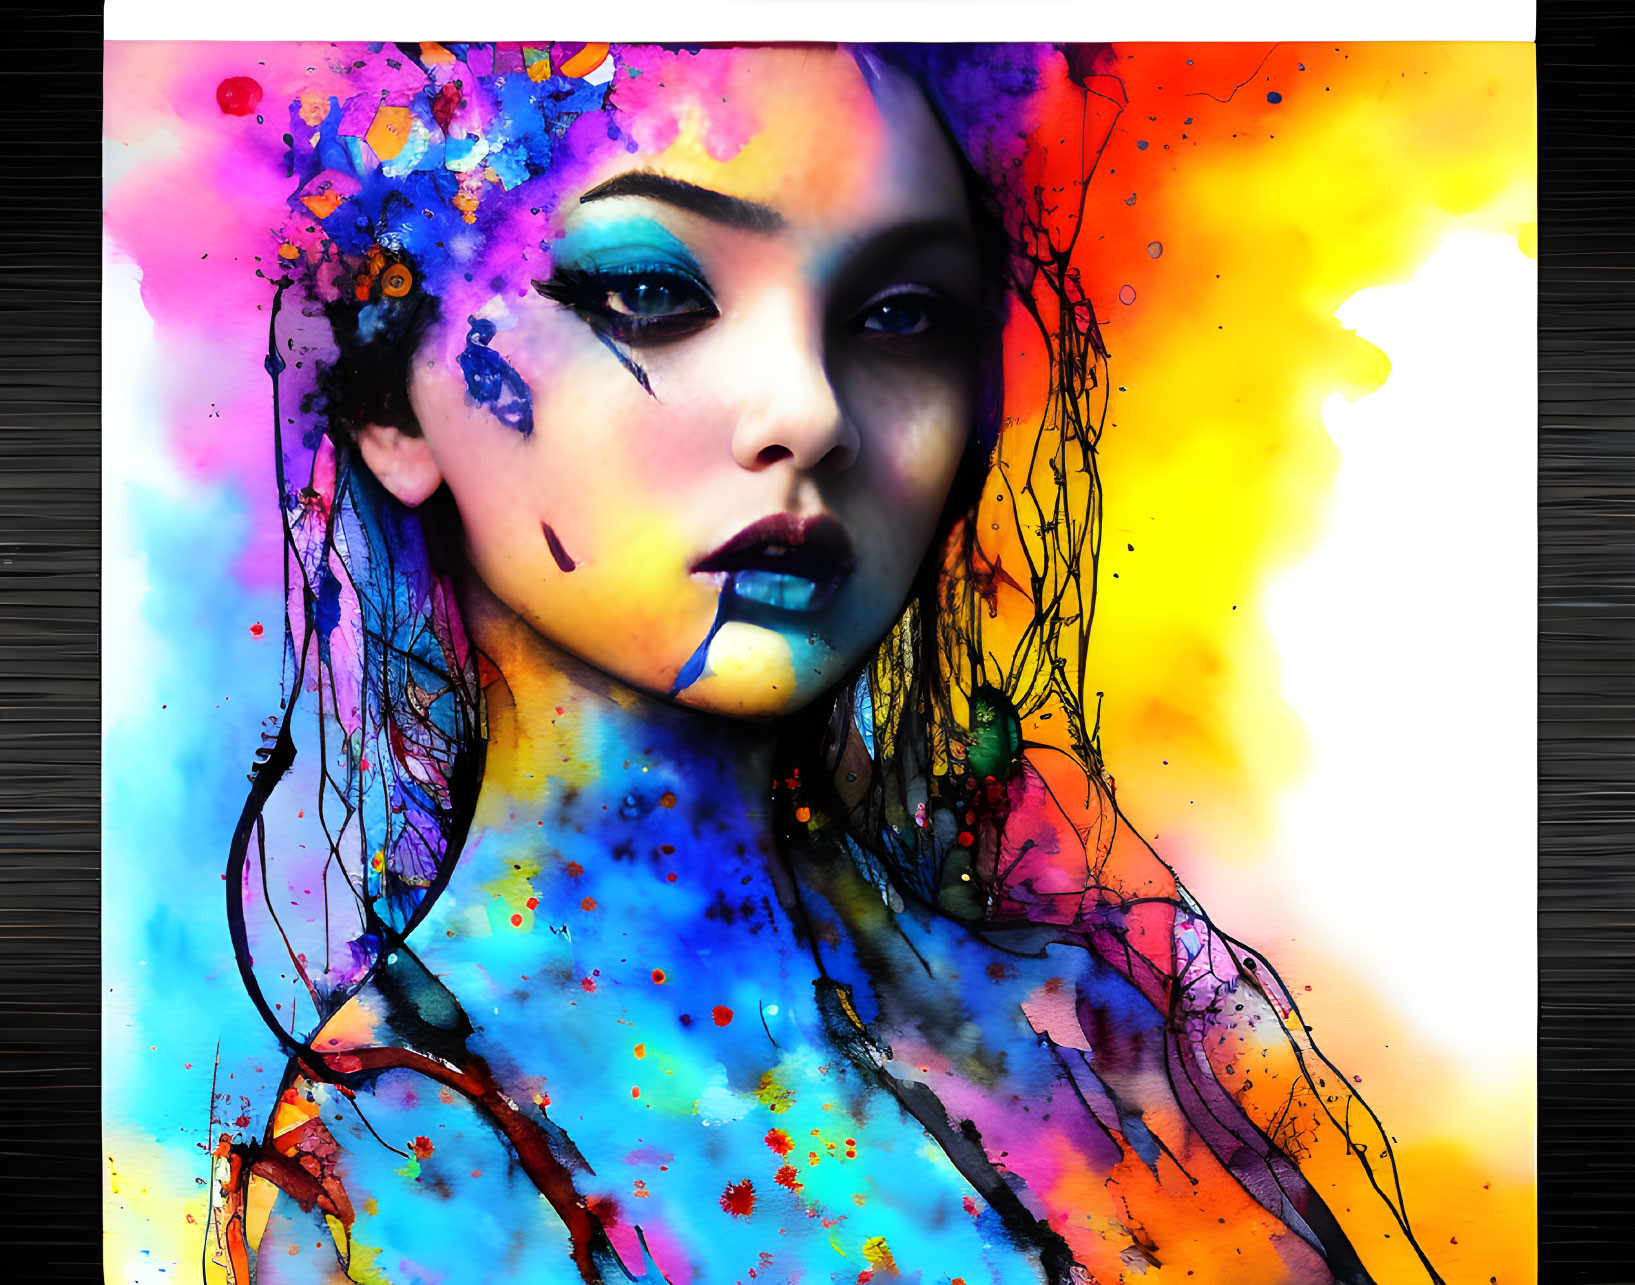 Colorful digital artwork of woman with abstract makeup in blue, purple, yellow, and red